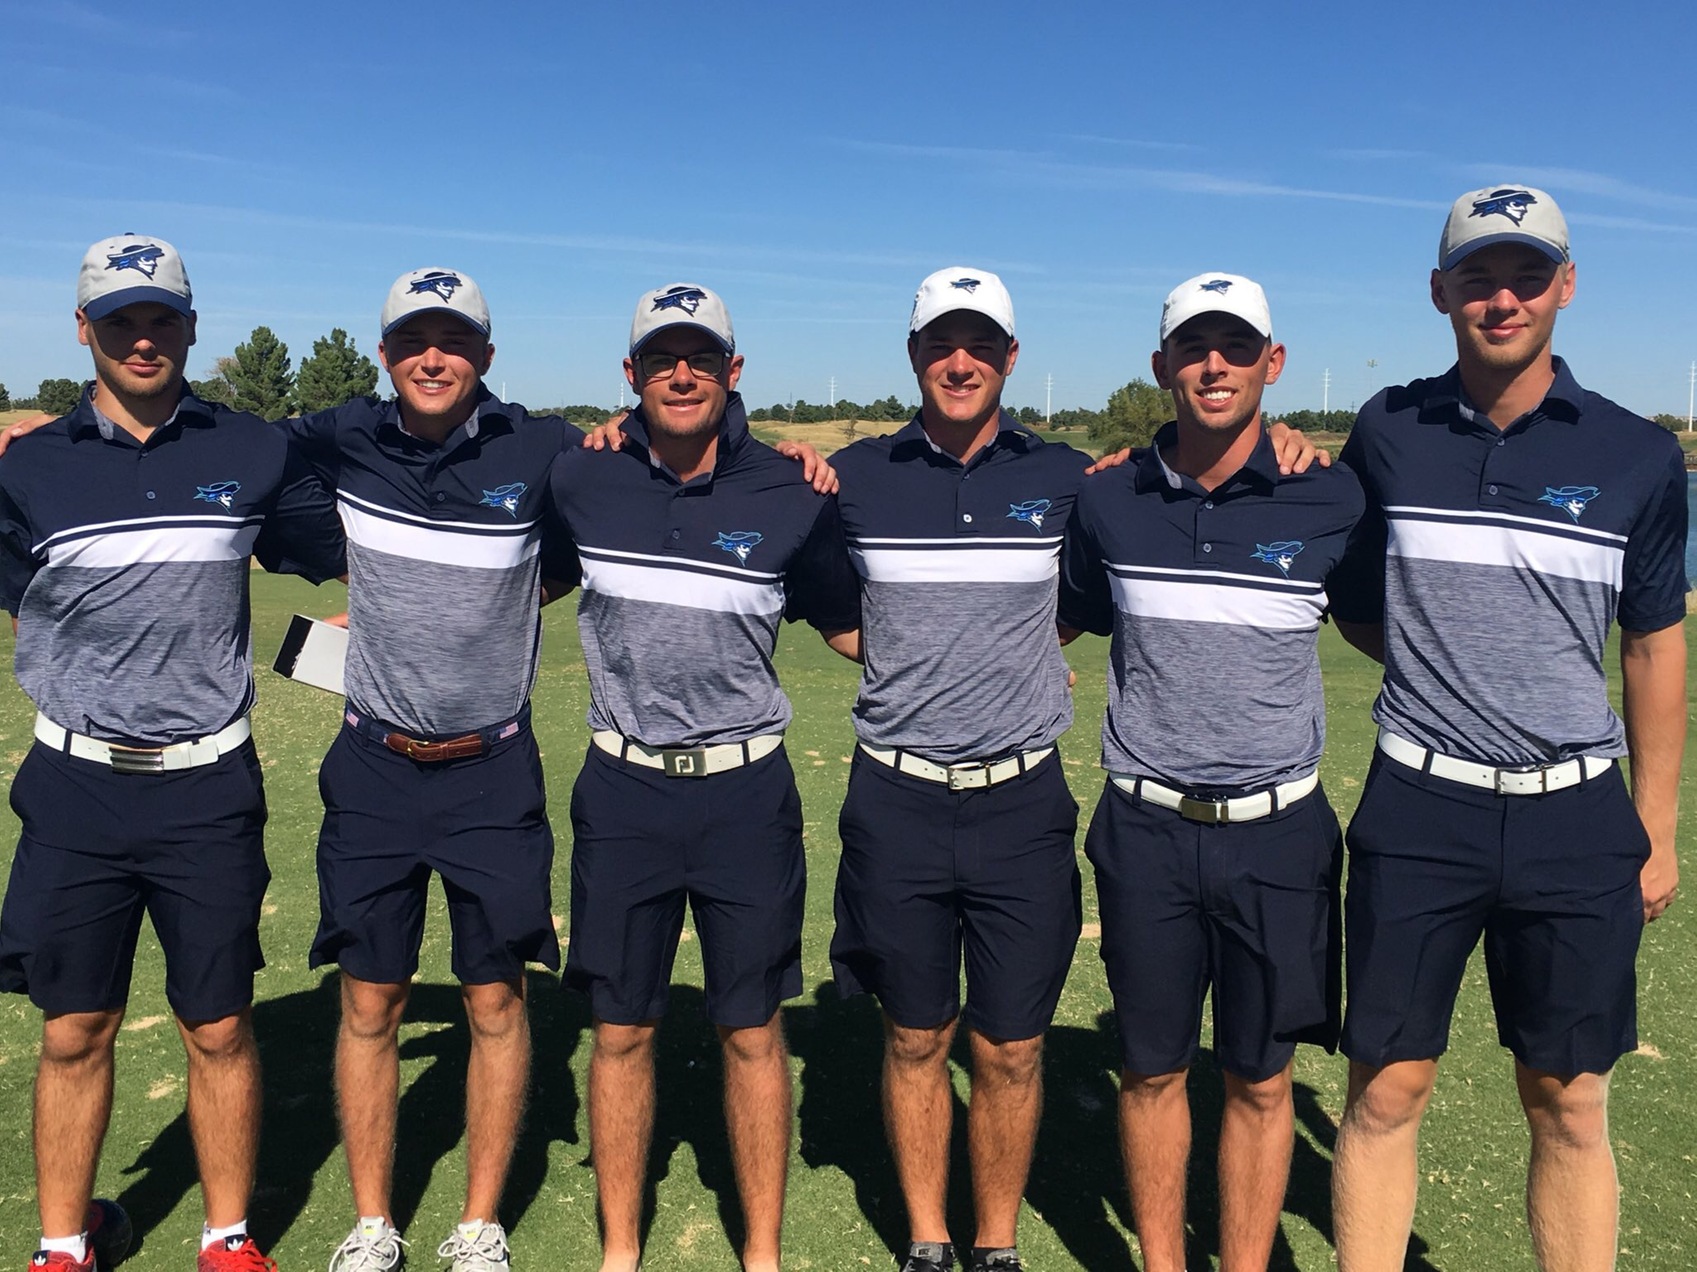 Reivers finish 5th at National Preview, Durnford 4th Individually